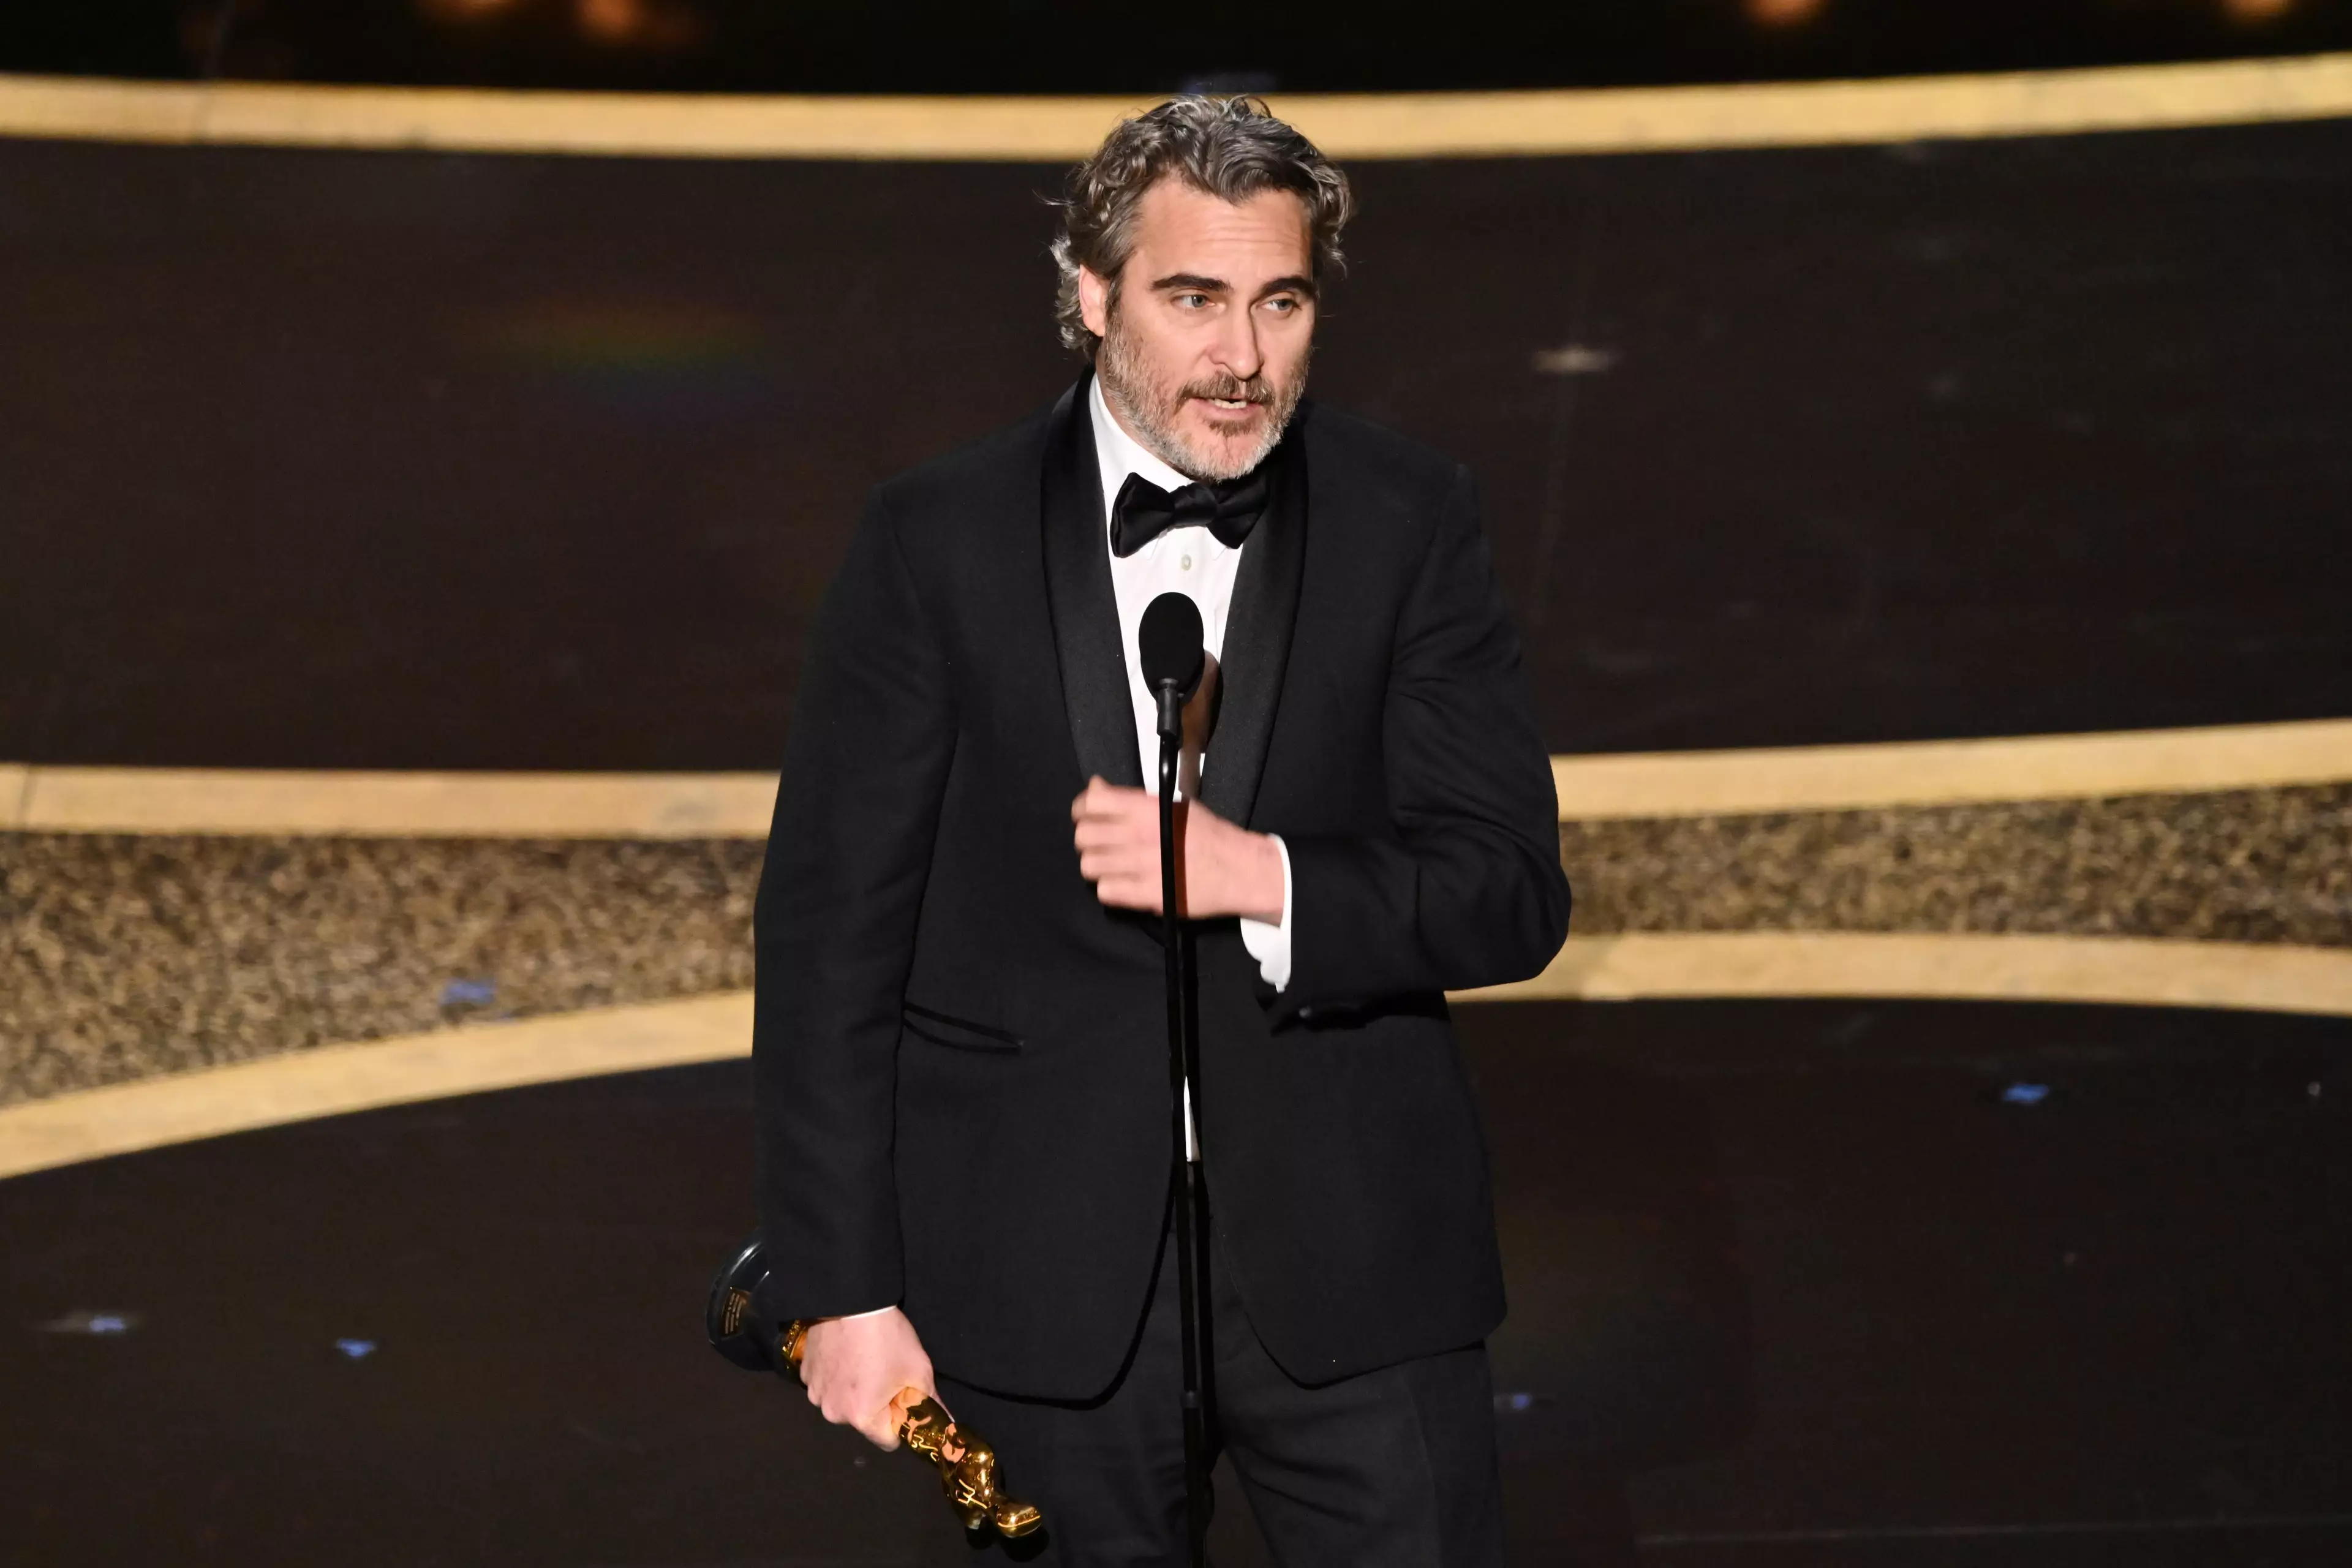 Joaquin Phoenix took to the stage and paid tribute to his late brother.